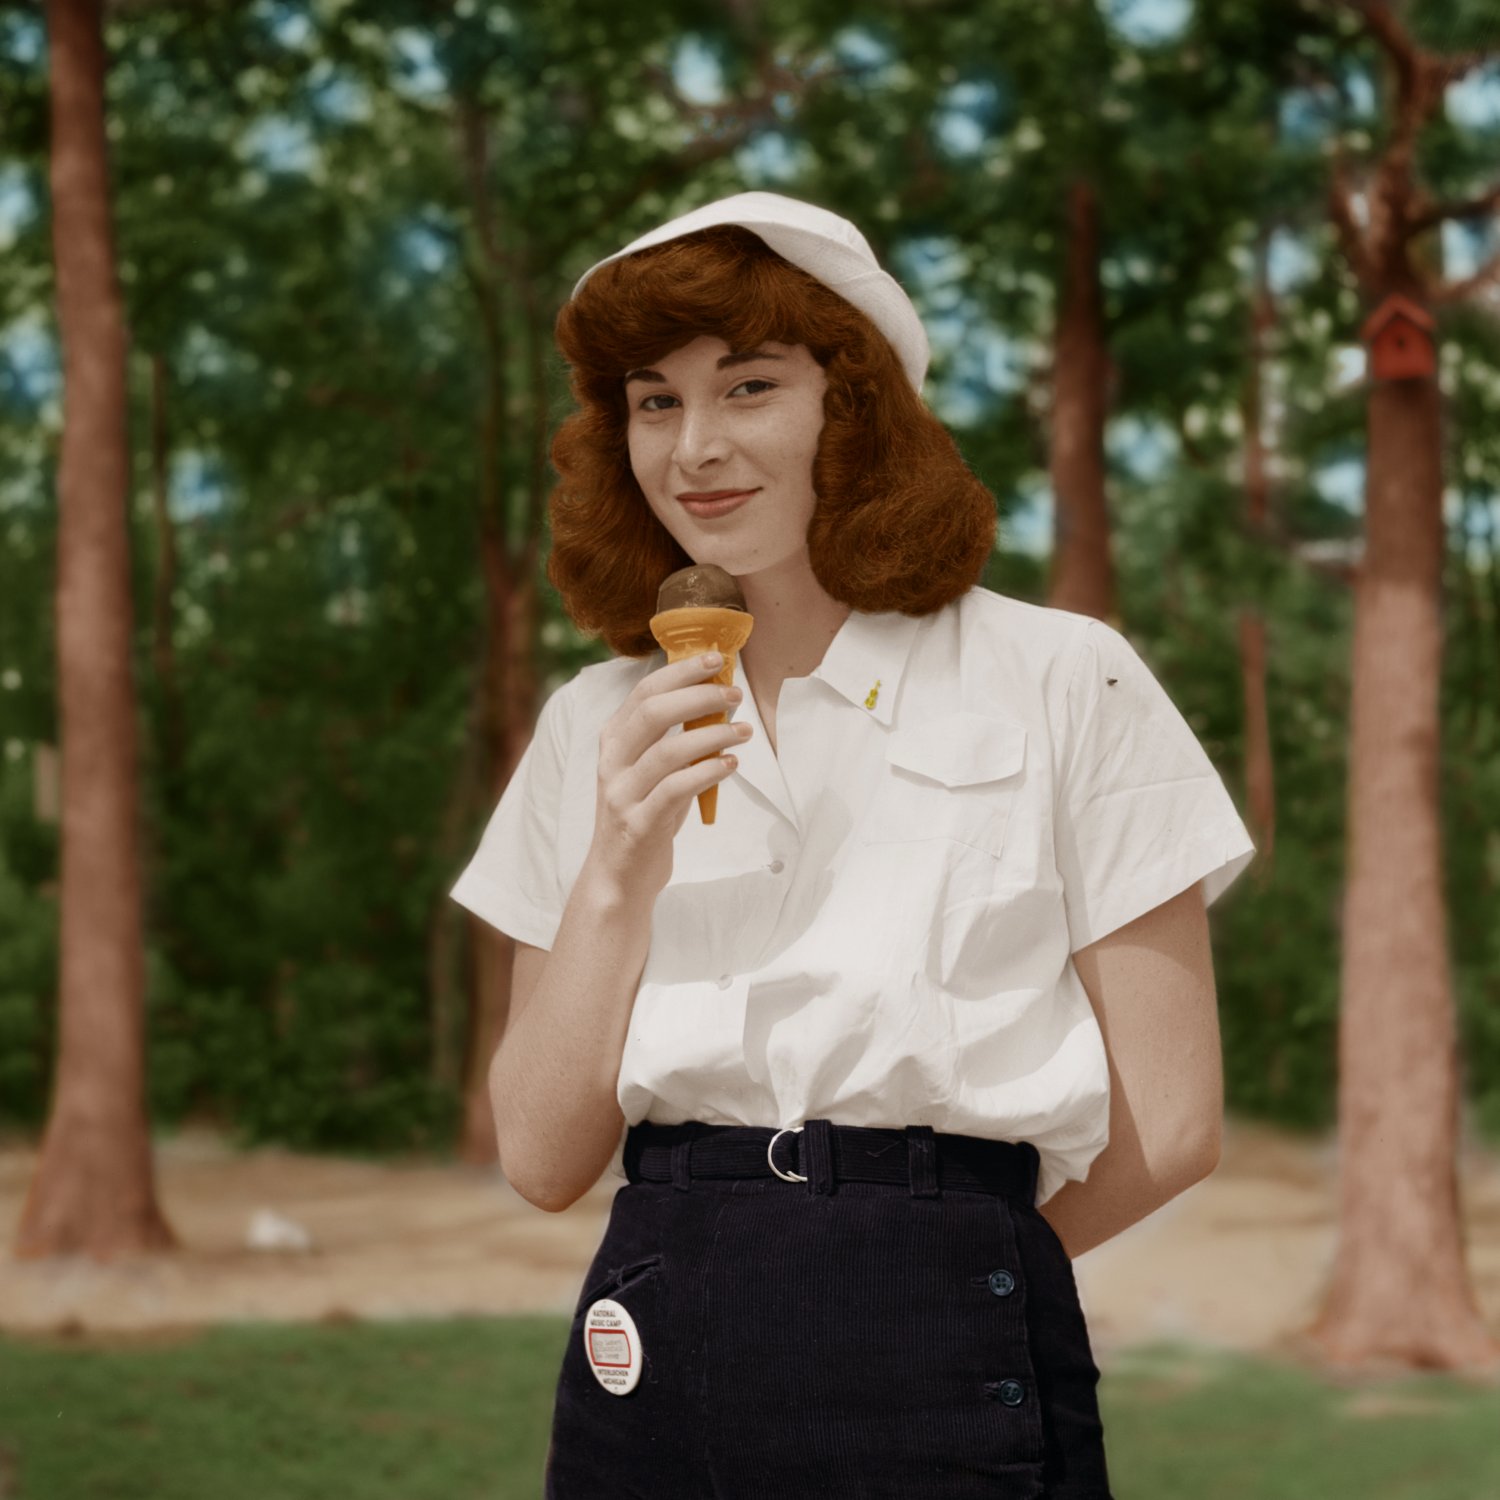 One of several colorizations I did of this Shorpy beauty. While it's not the greatest quality, this one has a certain ethereal quality that I like. View full size.